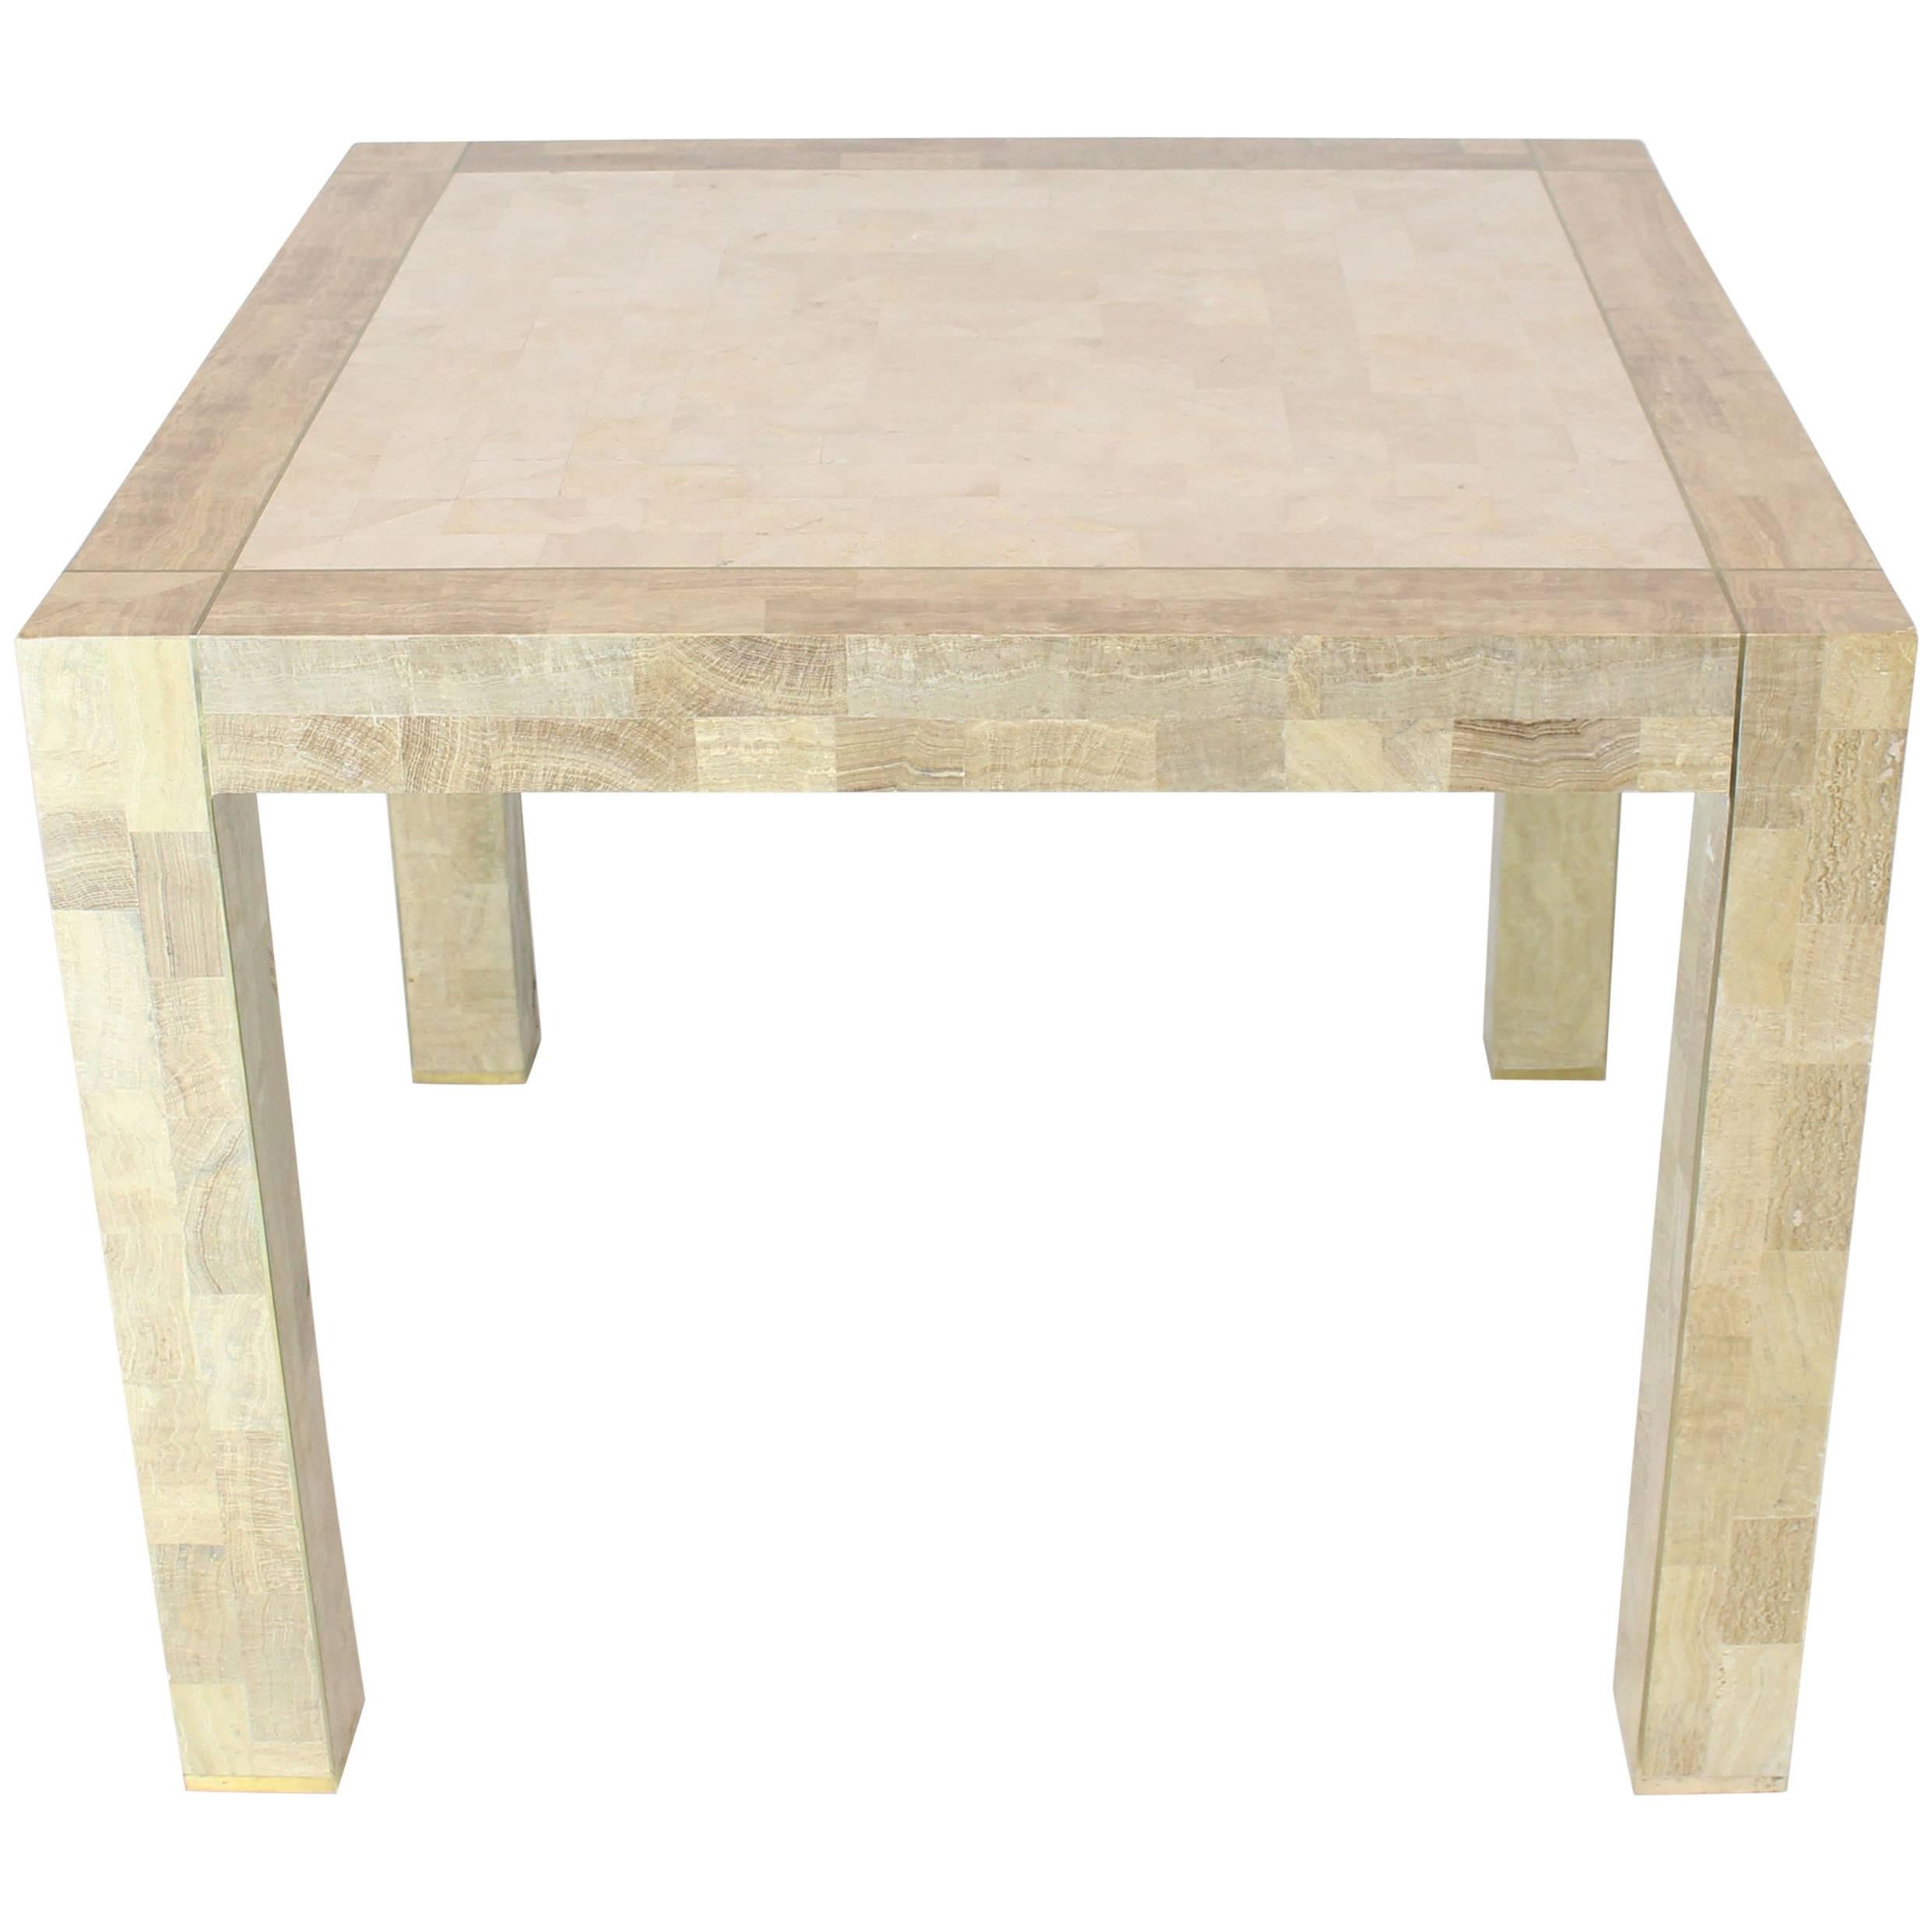 Tessellated Stone Veneer Brass Inlay Square Game Table